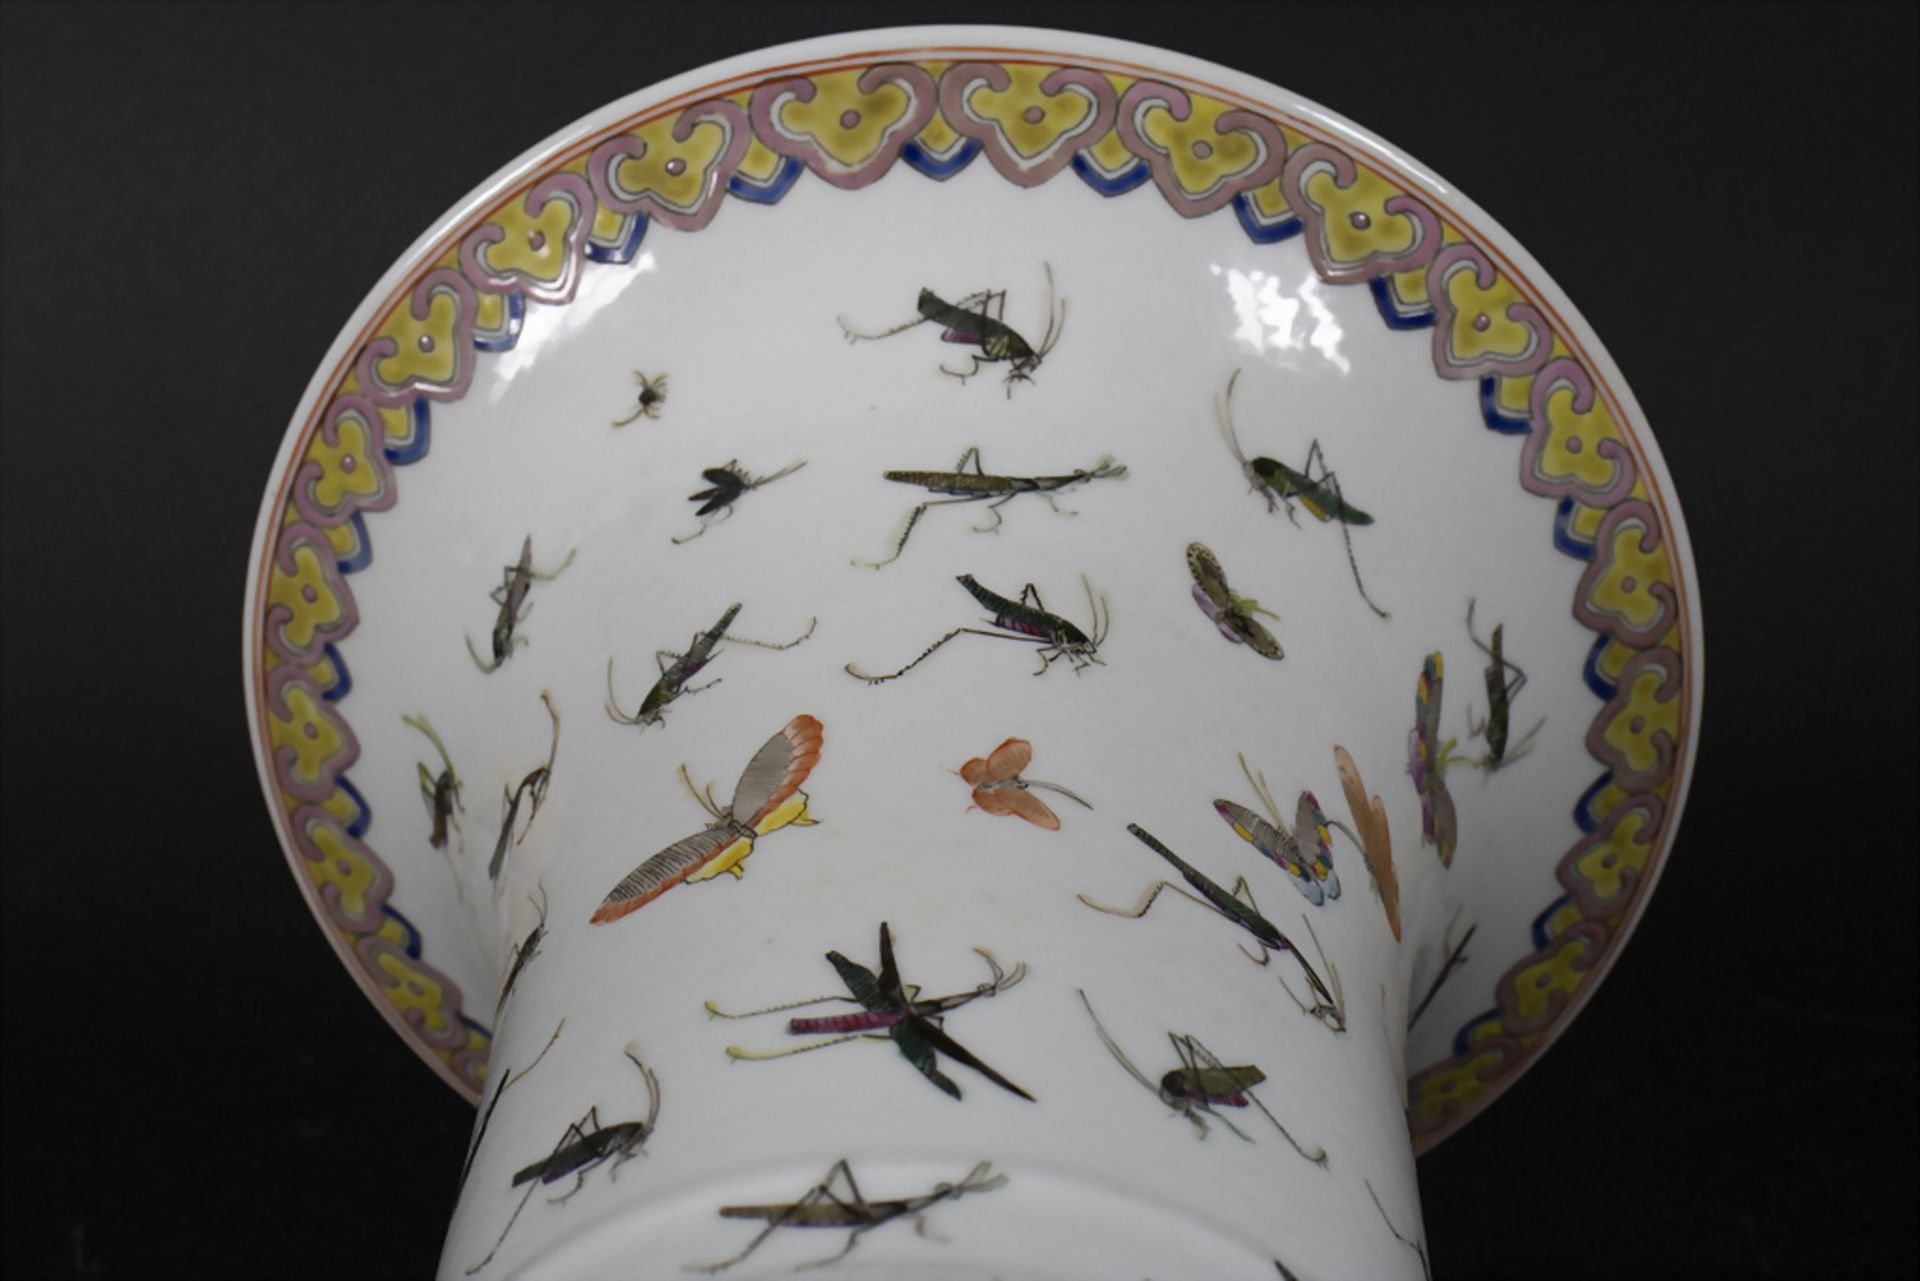 Porzellanvase mit Insekten in Gu Form / A GU shaped porcelain vase wih insects, China, 19./20. Jh. - Image 8 of 9